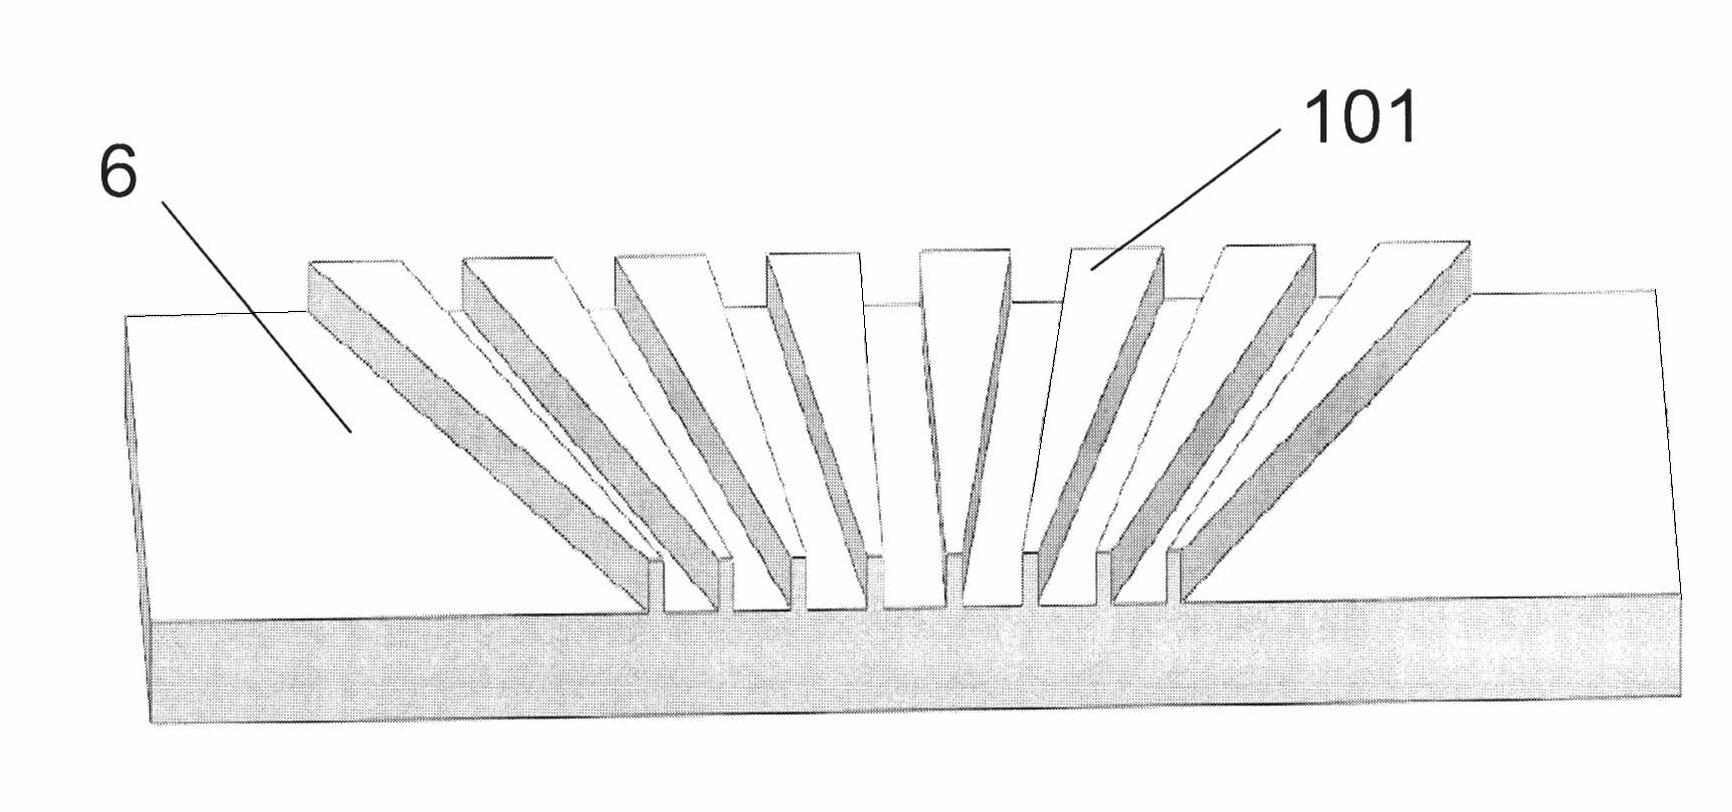 Mode converter having multi-layer structure and optical branching device